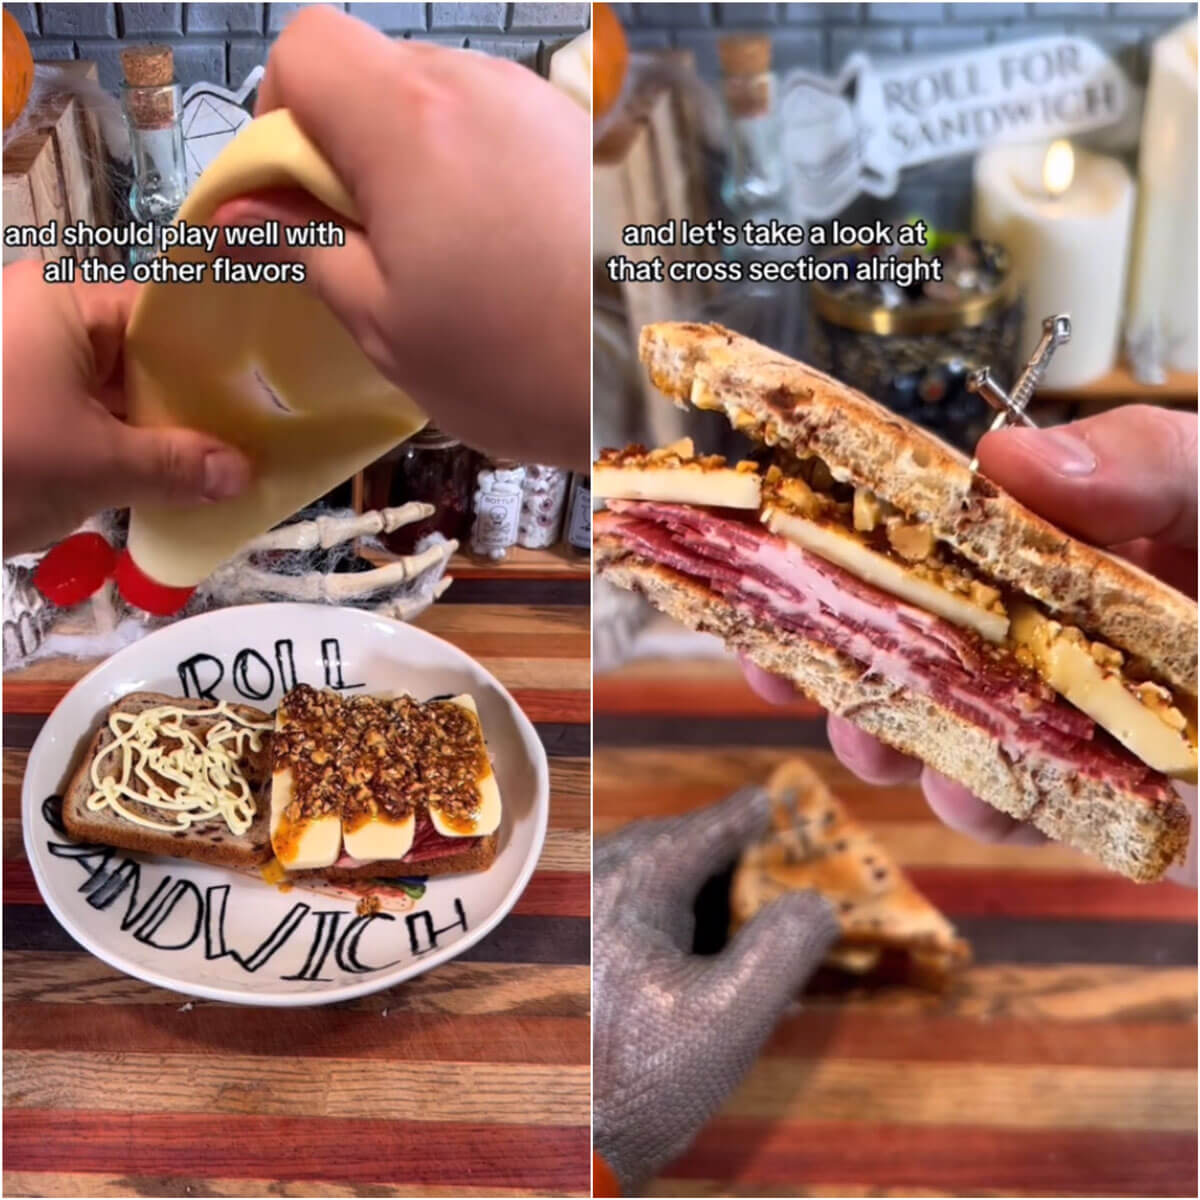 Geeking Out Over Sandwiches: The Best & Worst from TikTok’s Roll for Sandwich Series | Plated Asia Article